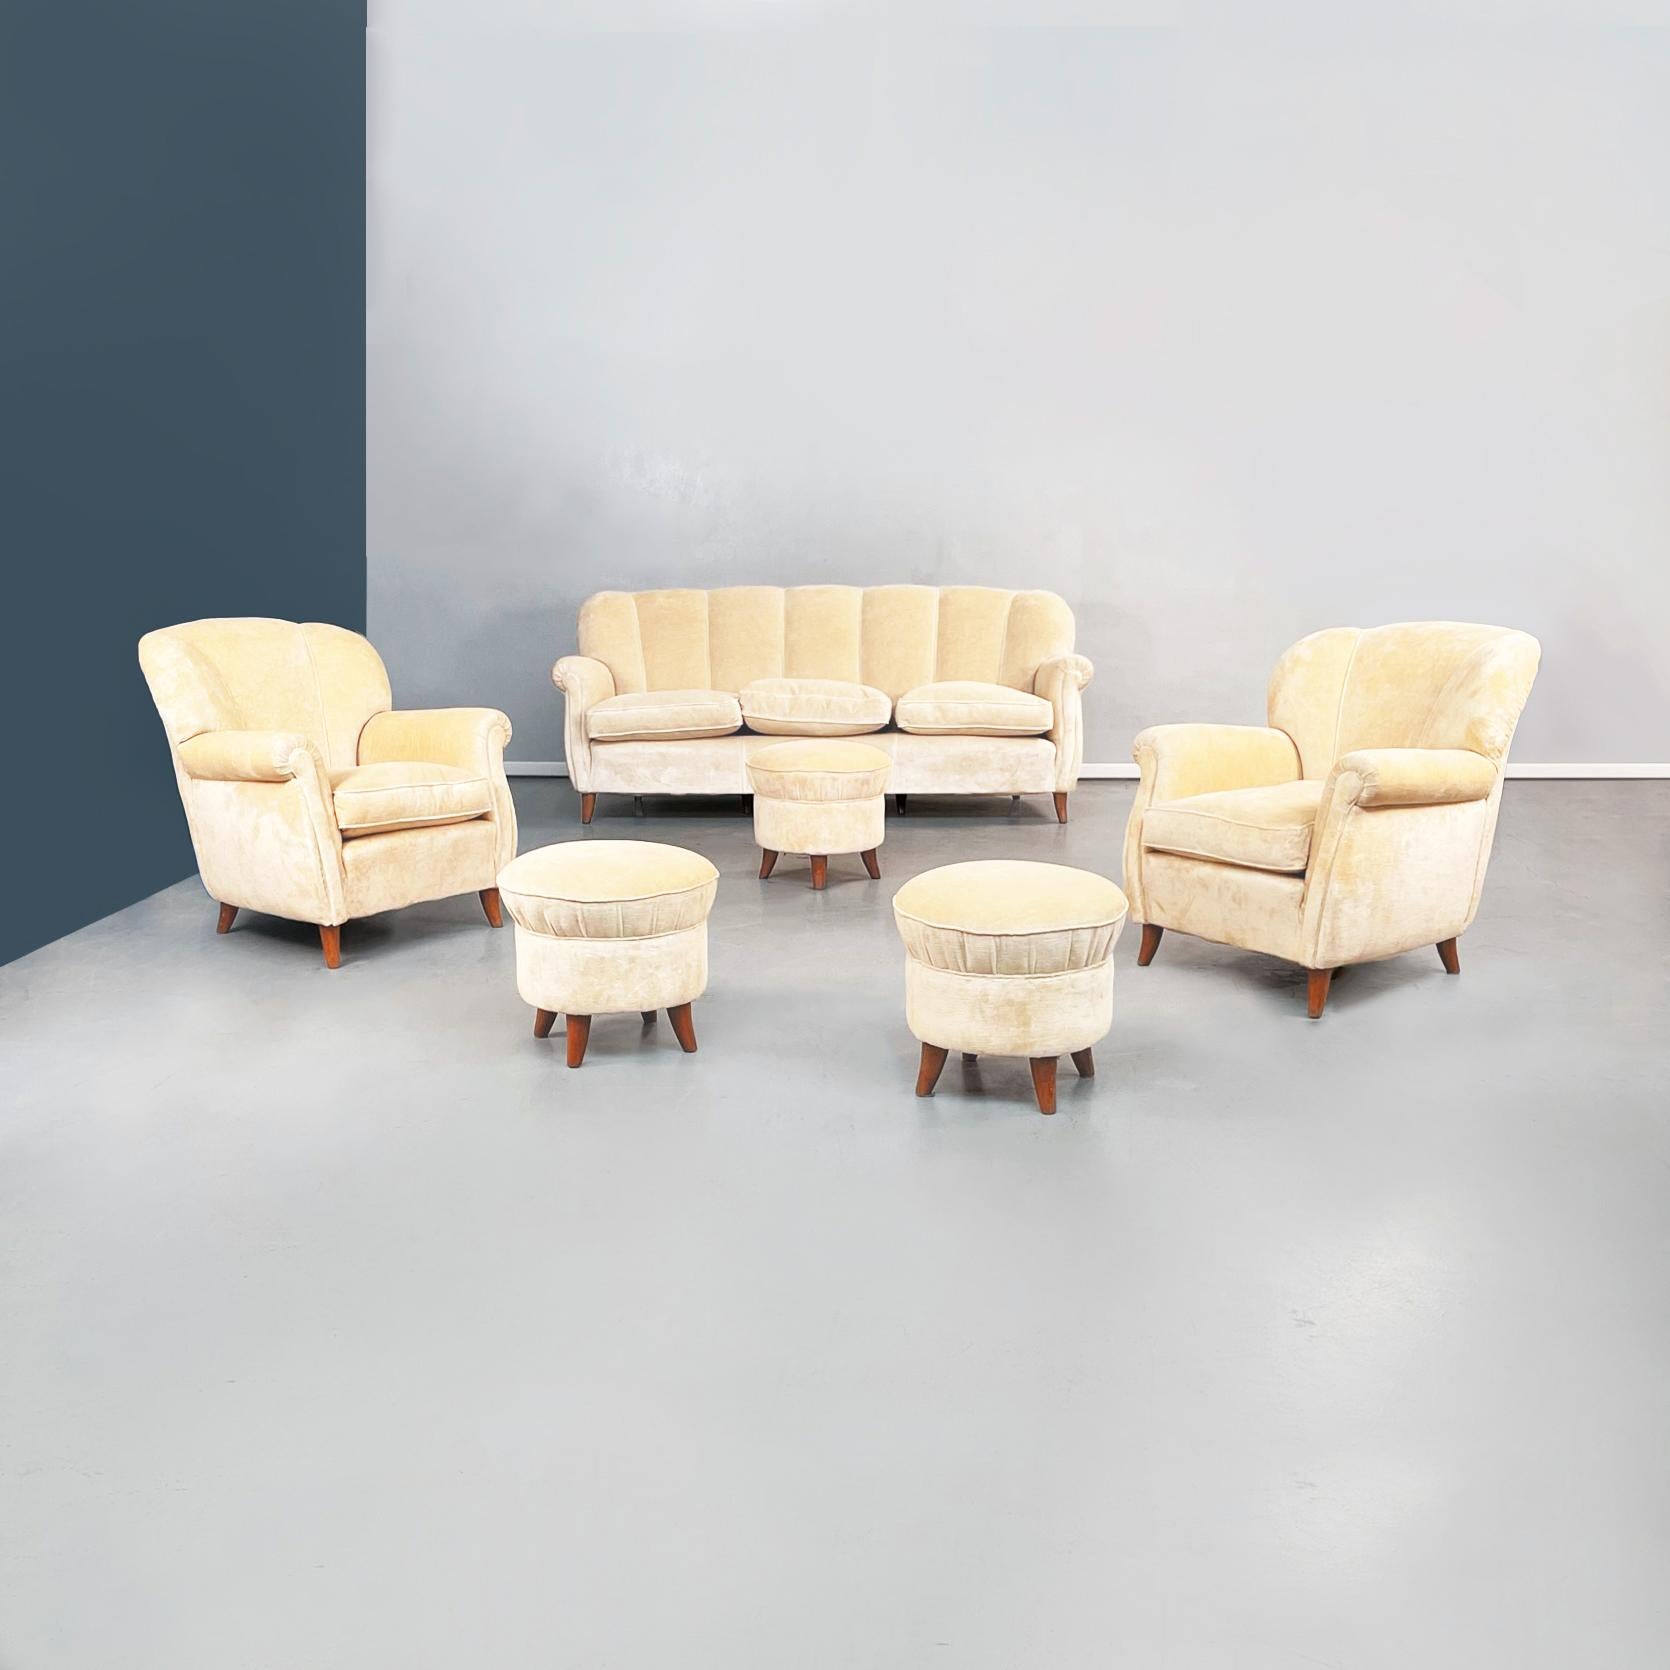 Italian Mid-Century Modern Wooden Armchairs in Beige Fabric, 1960s For Sale 14